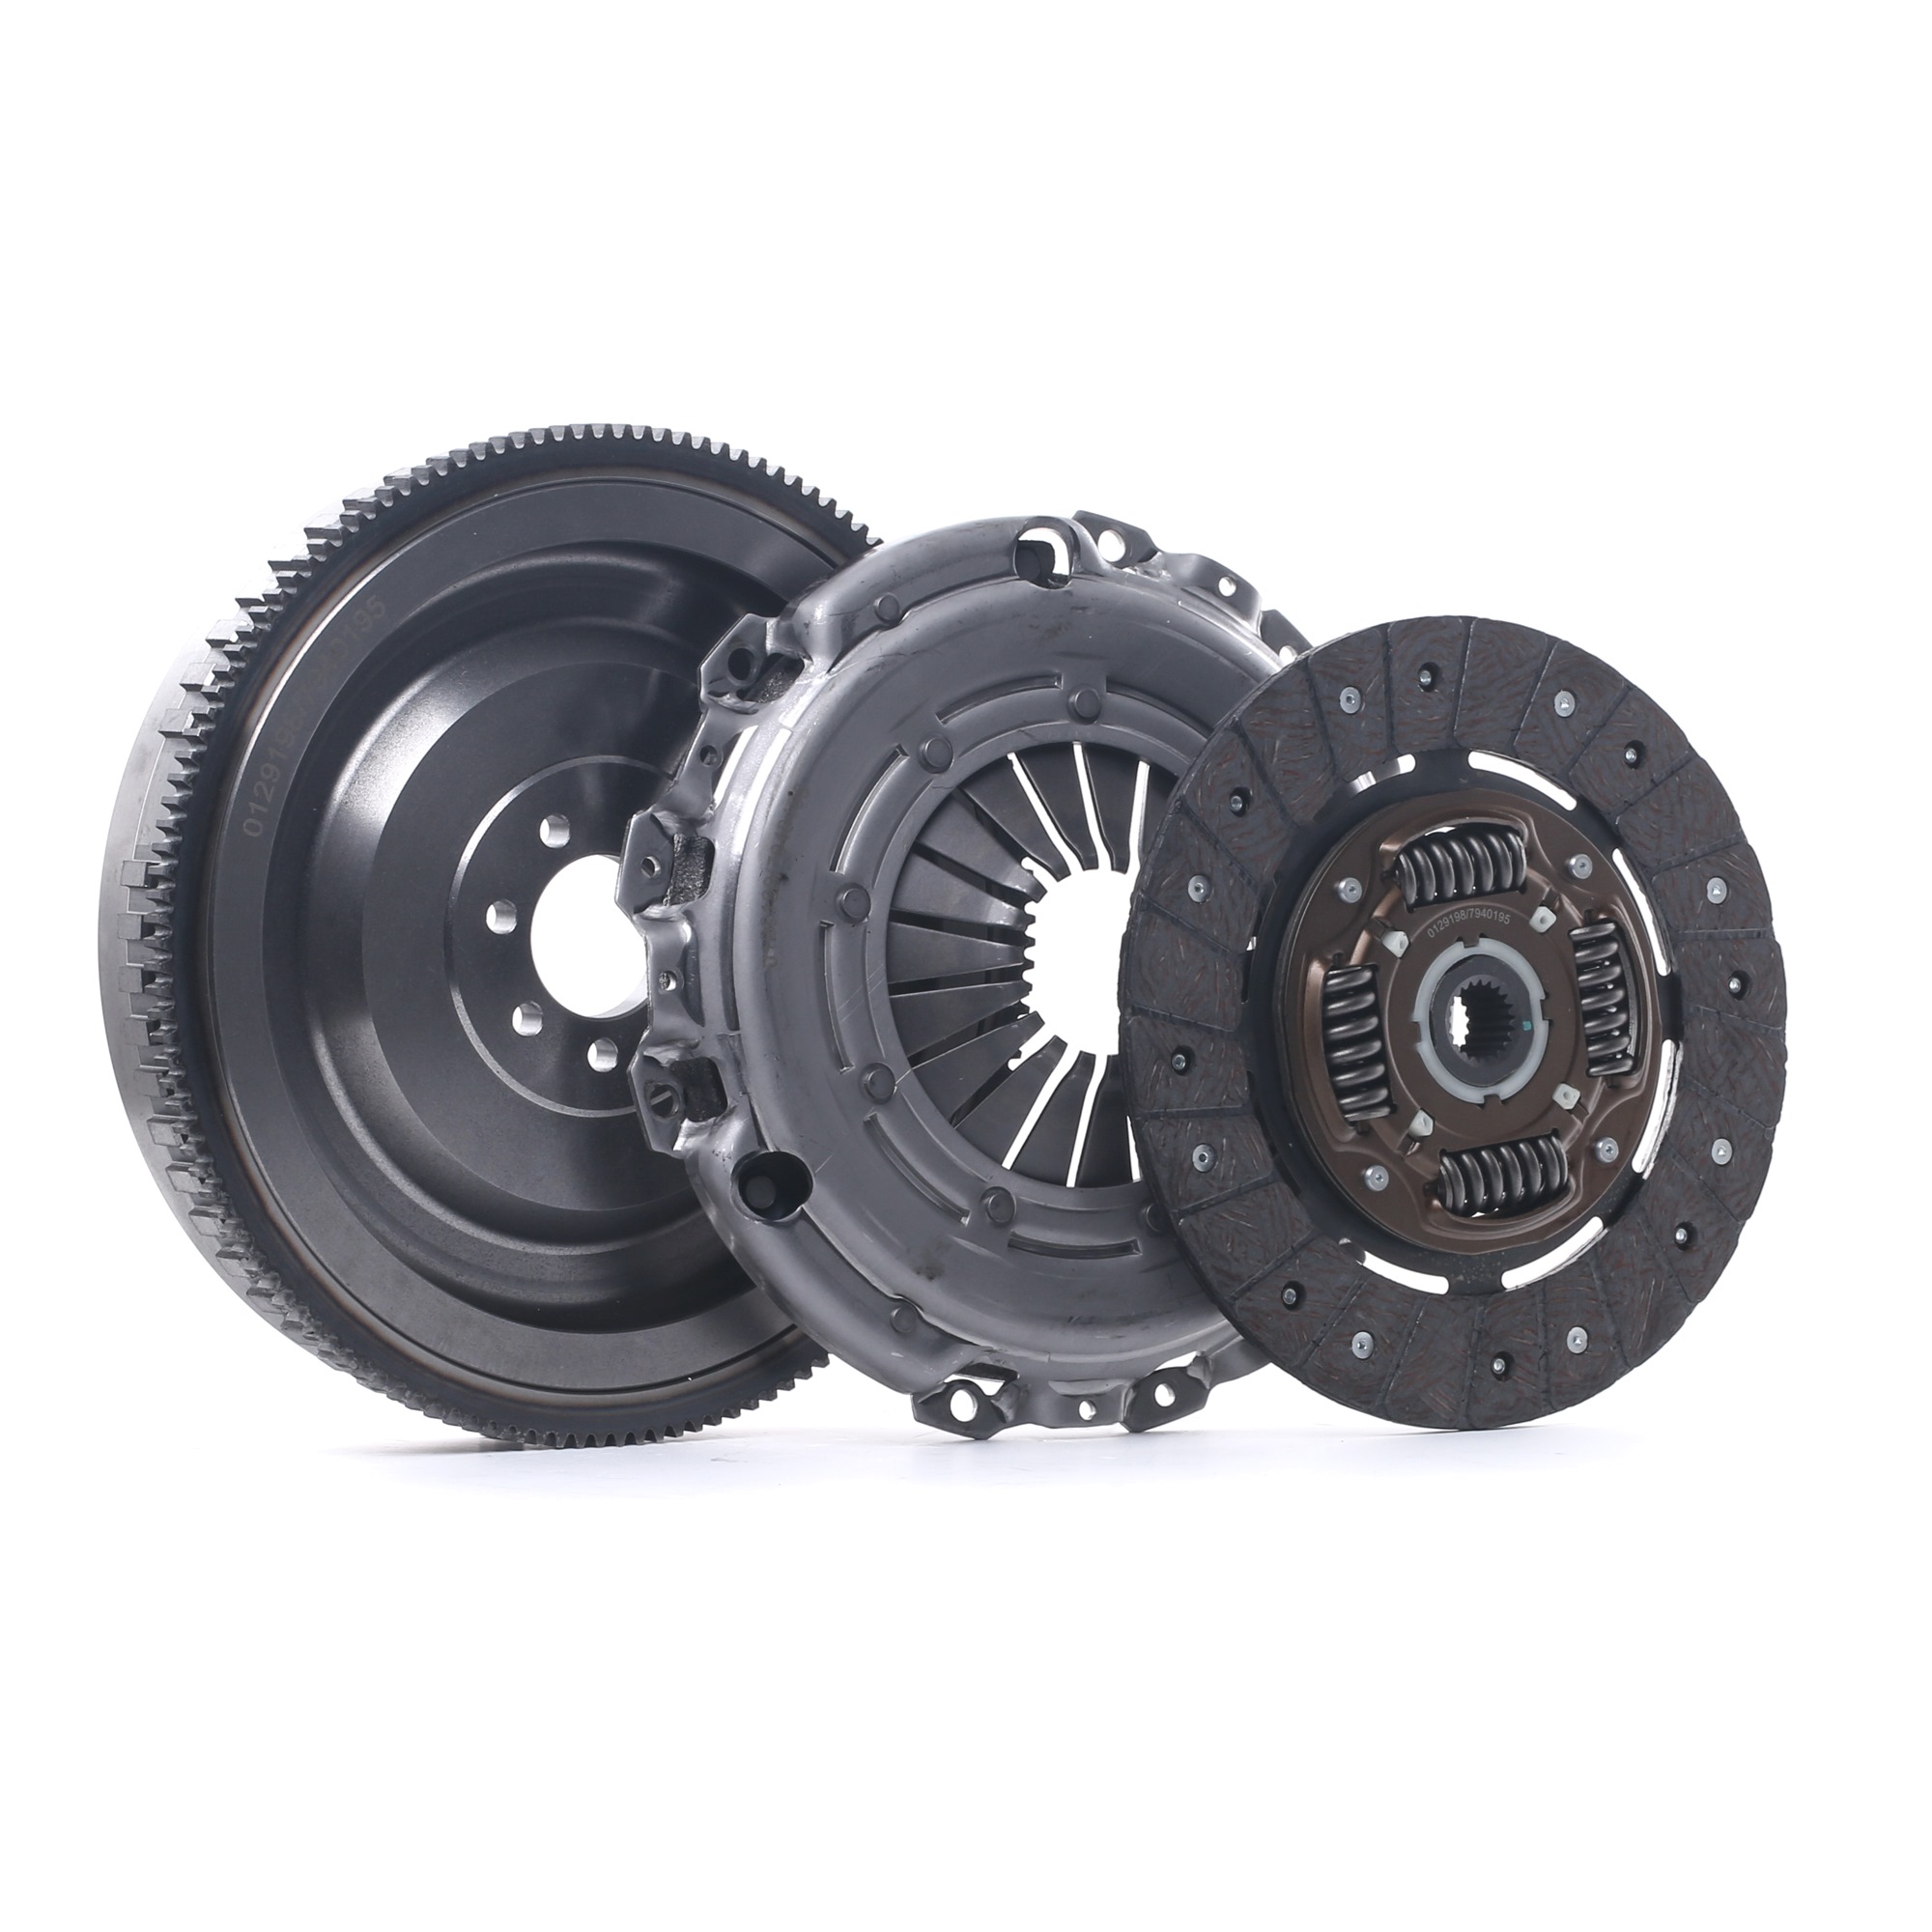 STARK SKCK-0100052 Clutch kit with clutch pressure plate, with flywheel, with clutch disc, with screw set, 240mm